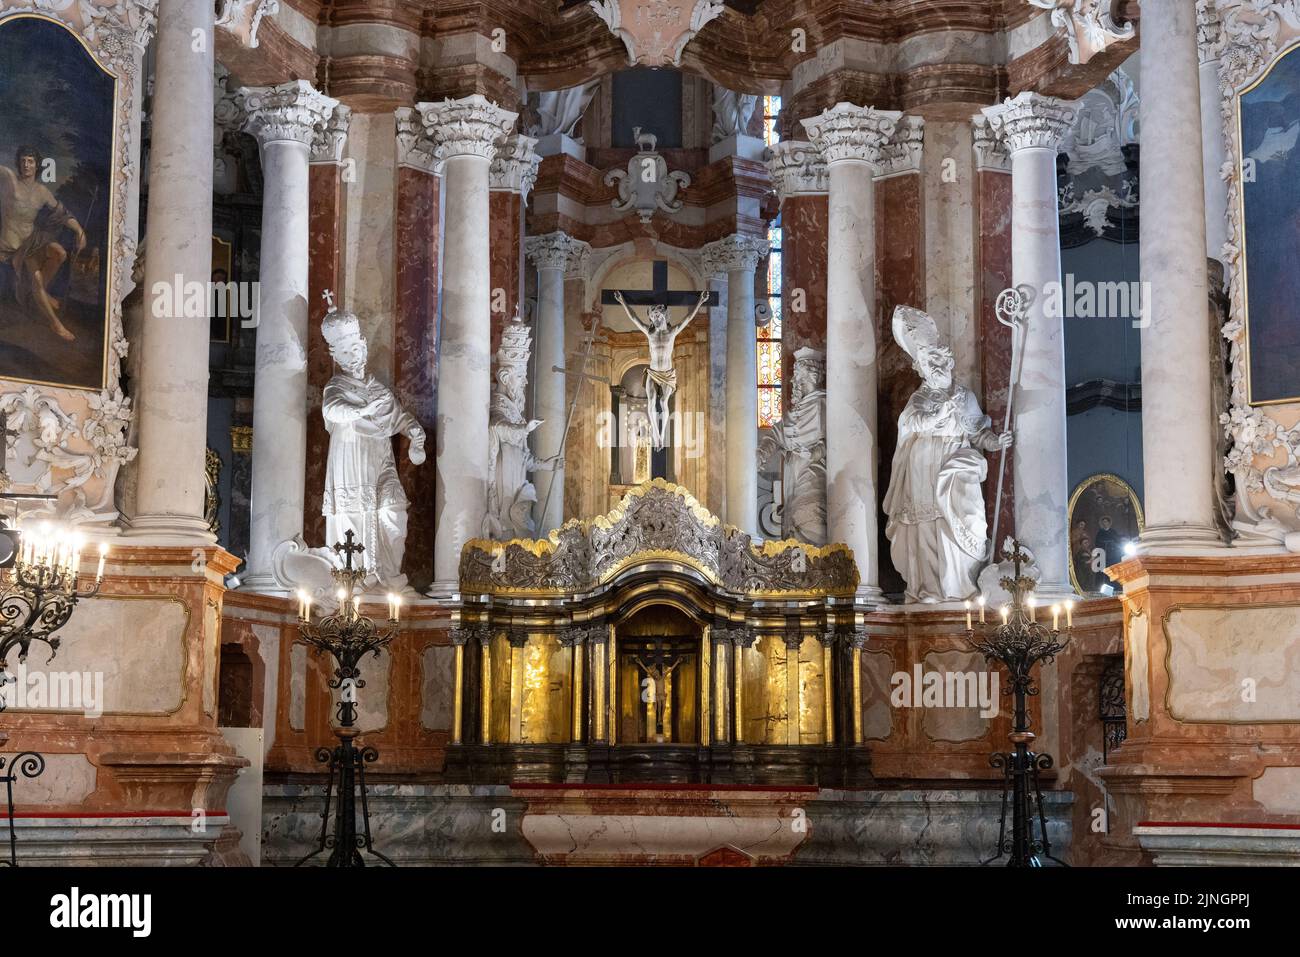 Altar and statues in the Baroque style interior, Church of St Johns, Vilnius University, Vilnius Old Town, Vilnius Lithuania Europe Stock Photo